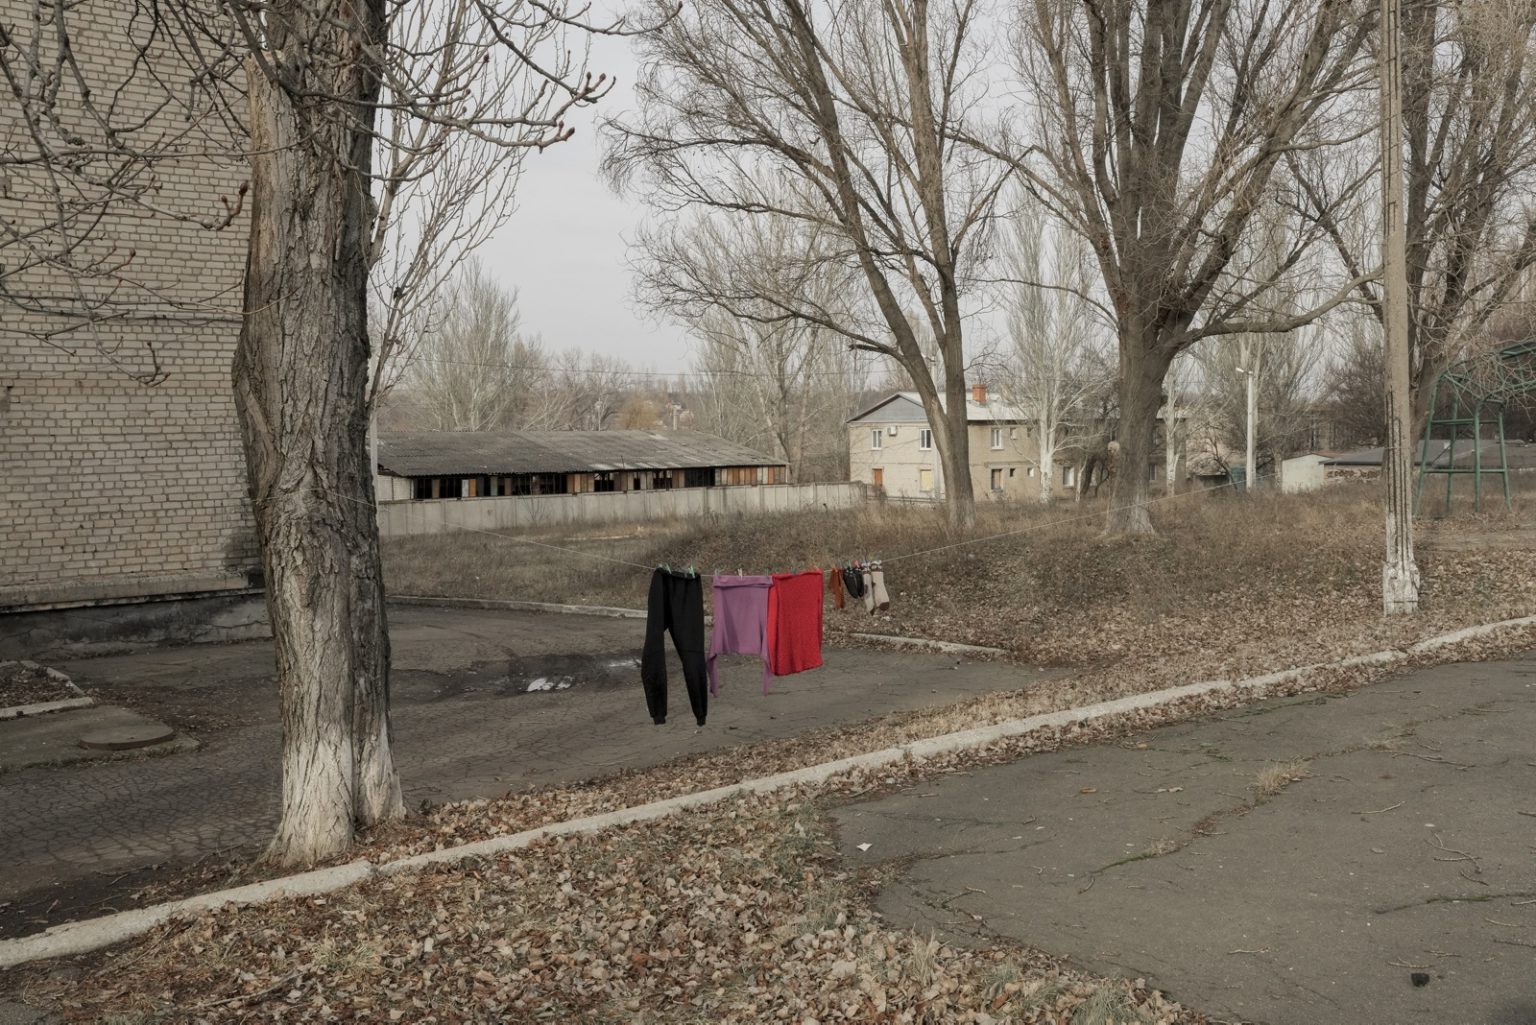 UKRAINE, Bakhmut. January 21, 2023 - Cloths hung out to dry near a basment used by families as shelter in Bakhmut.  ><
UCRAINA, Bakhmut. 21 gennaio 2023 - Panni stesi ad asciugare vicino a un seminterrato usato dalle famiglie come rifugio a Bakhmut.